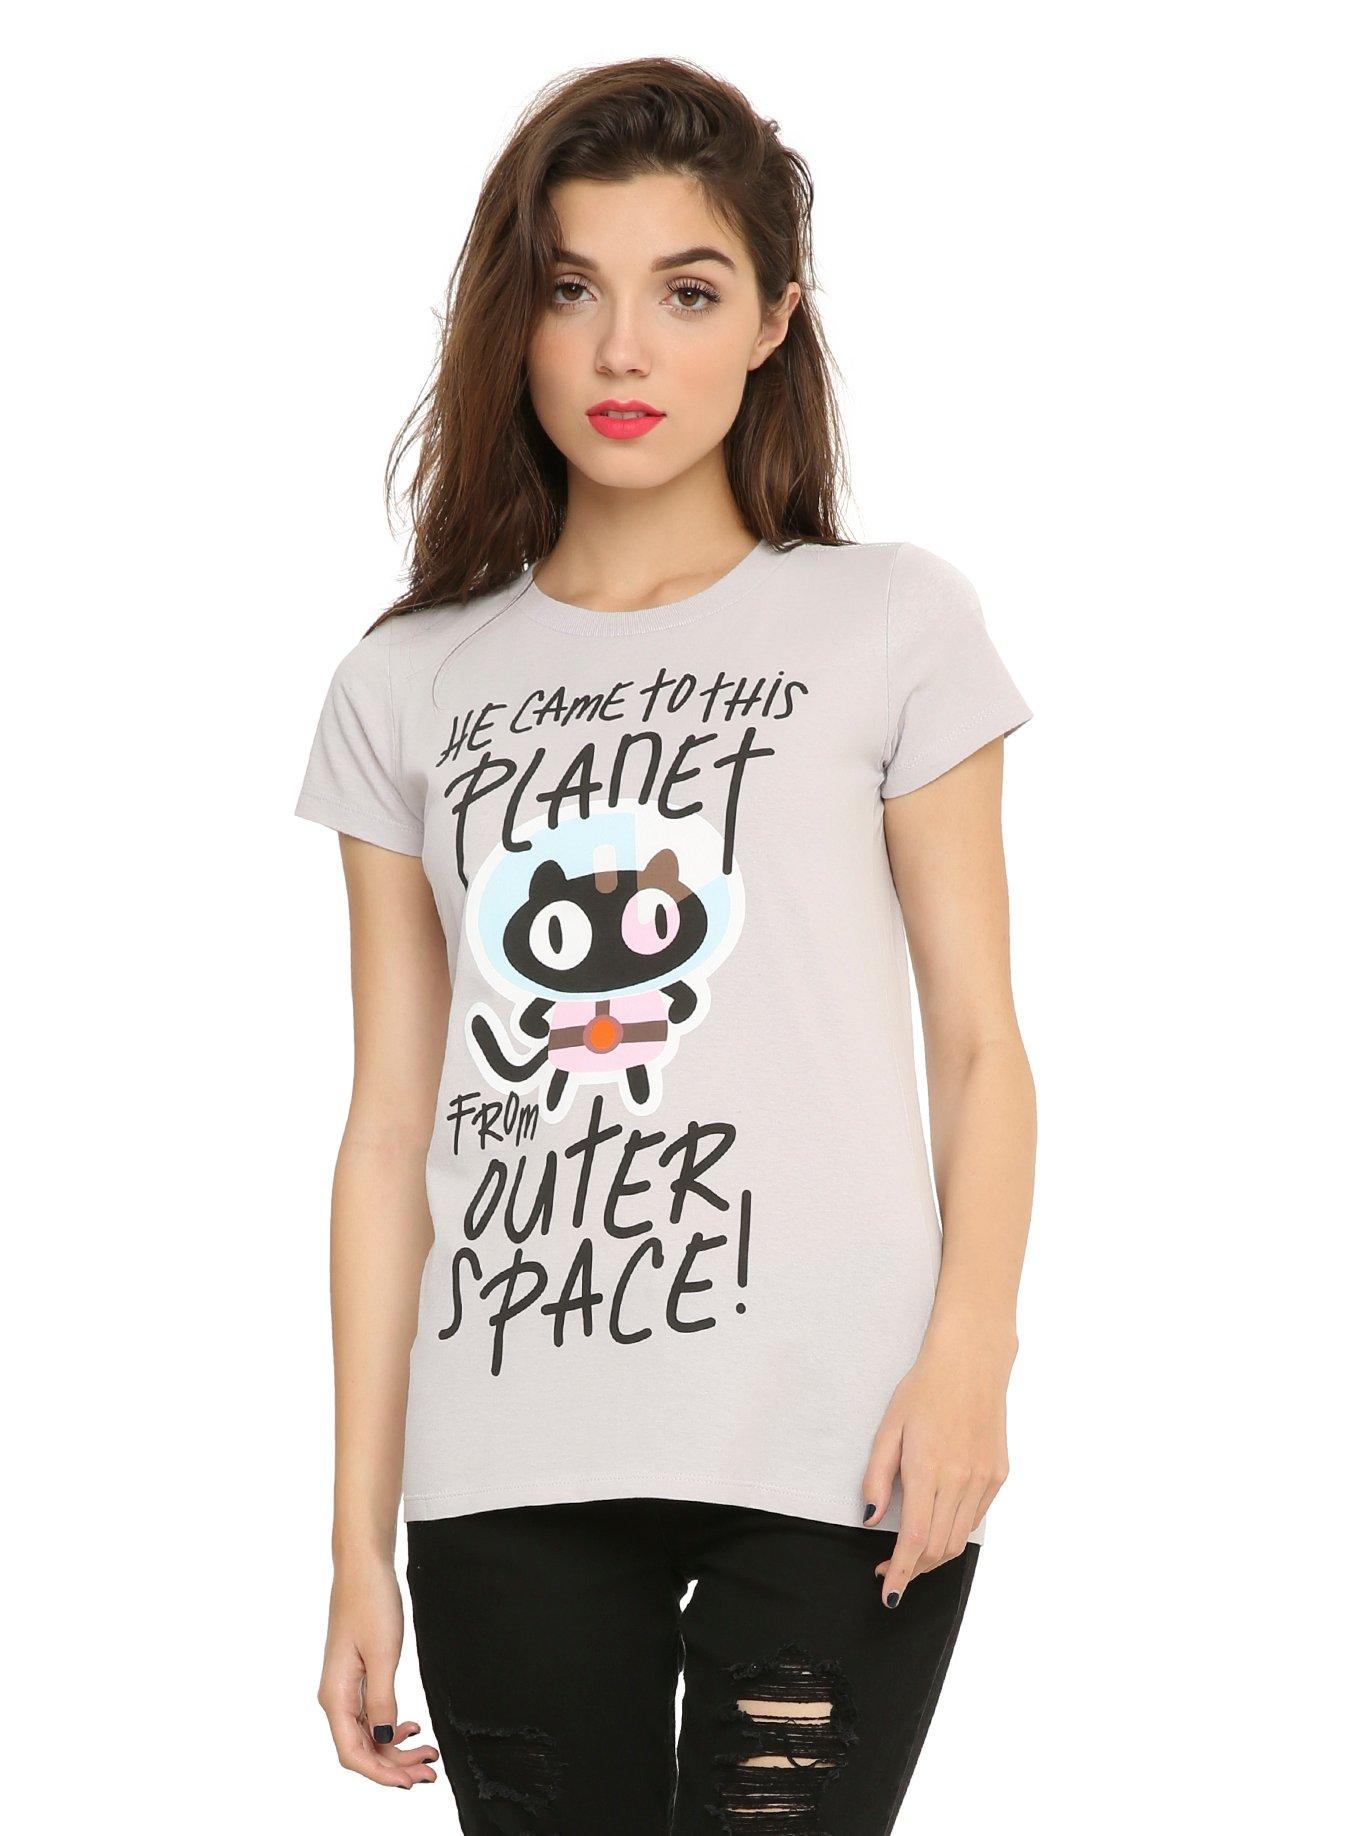 Steven Universe Cookie Cat From Outer Space Girls T-Shirt | Hot Topic